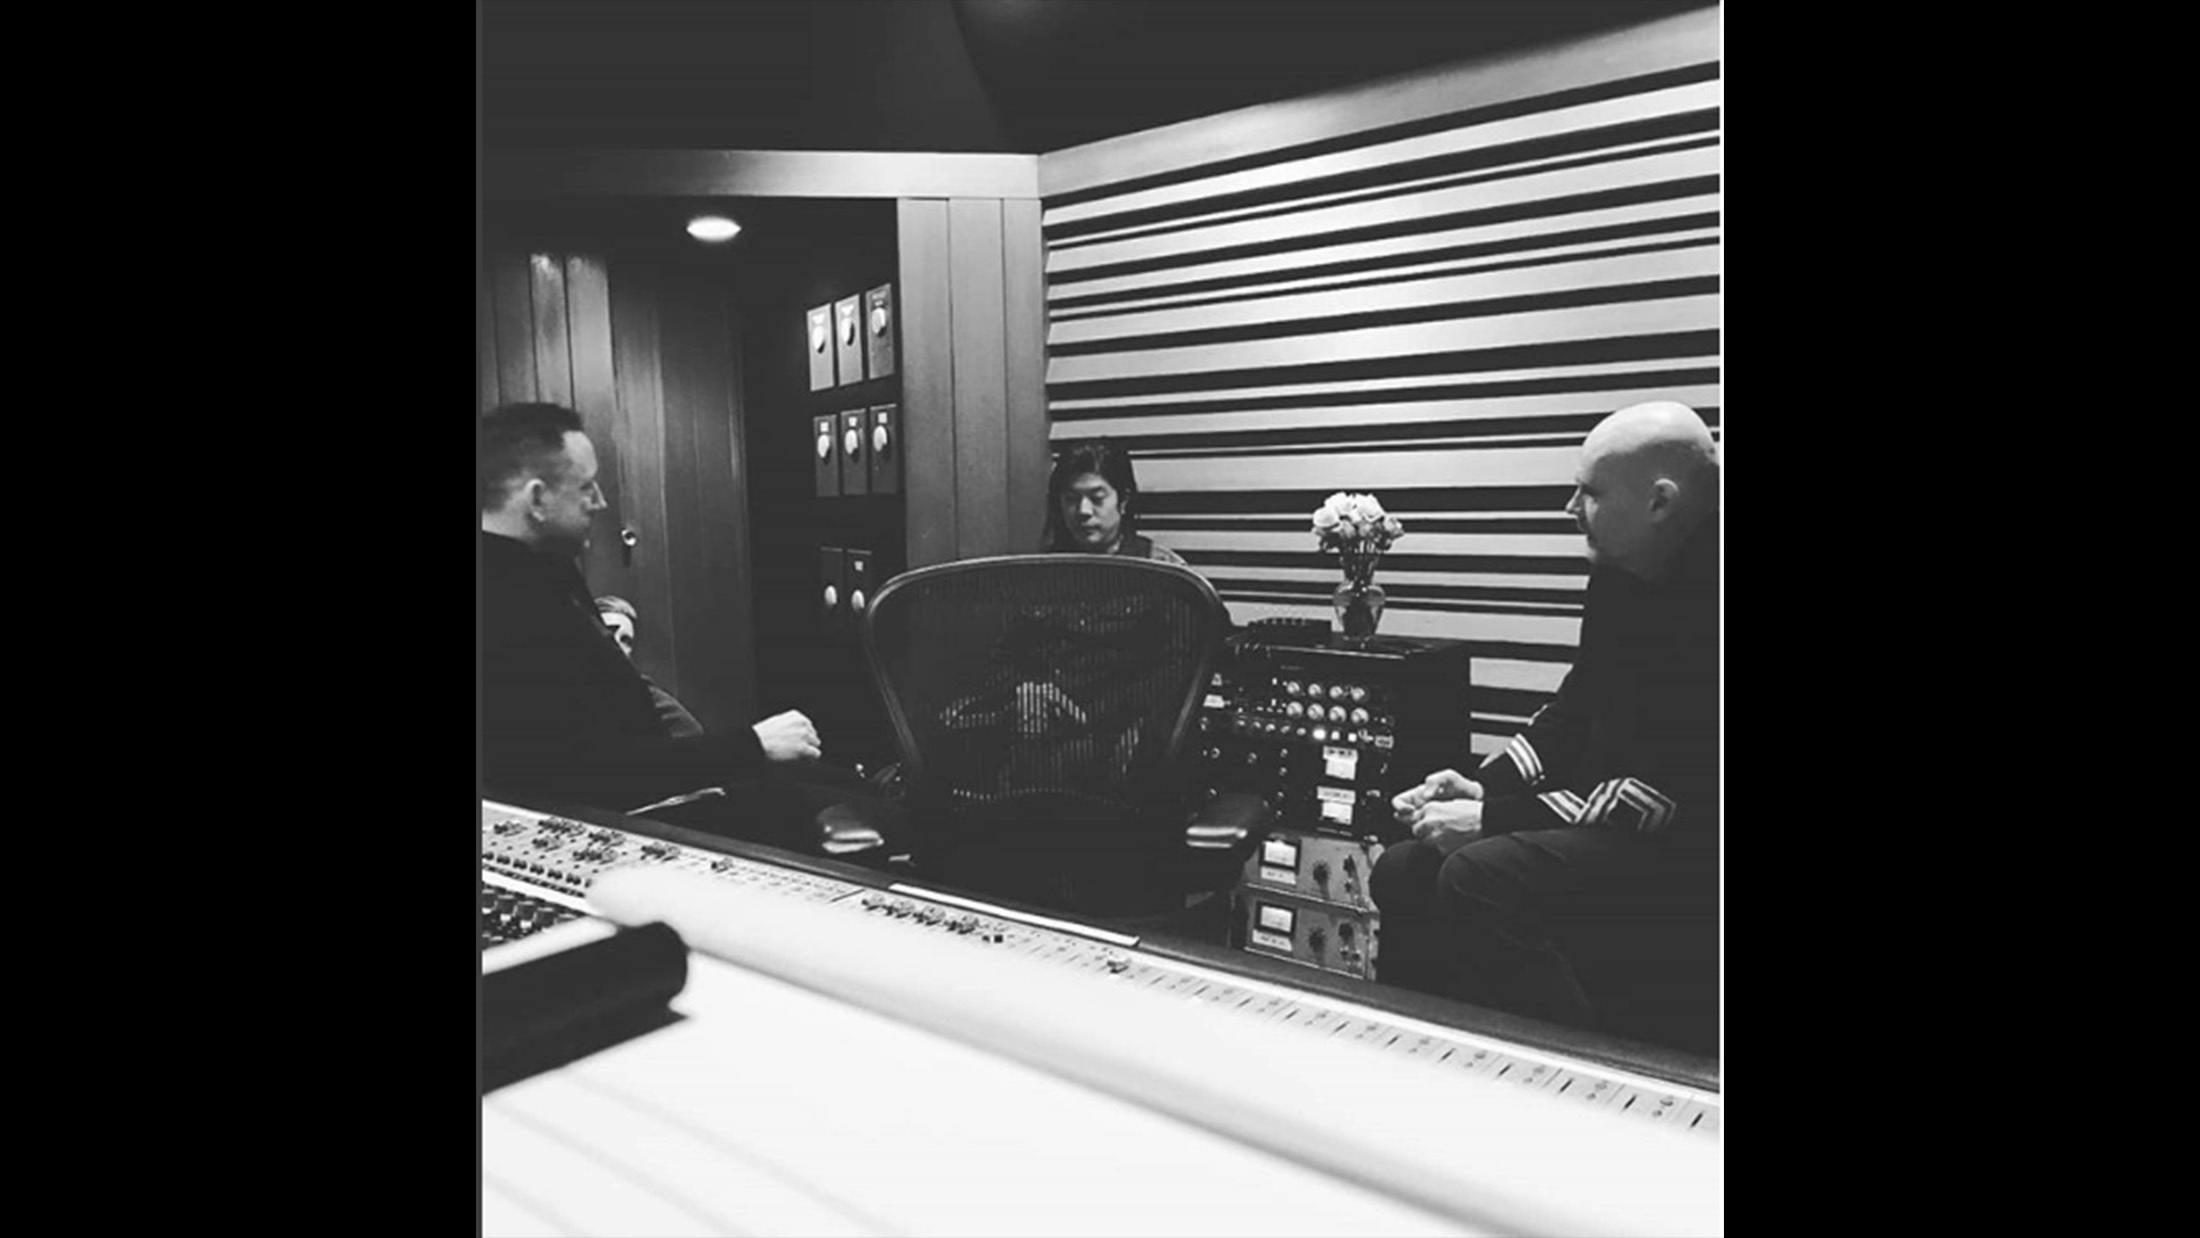 Original Smashing Pumpkins Members Pictured In The Studio Together